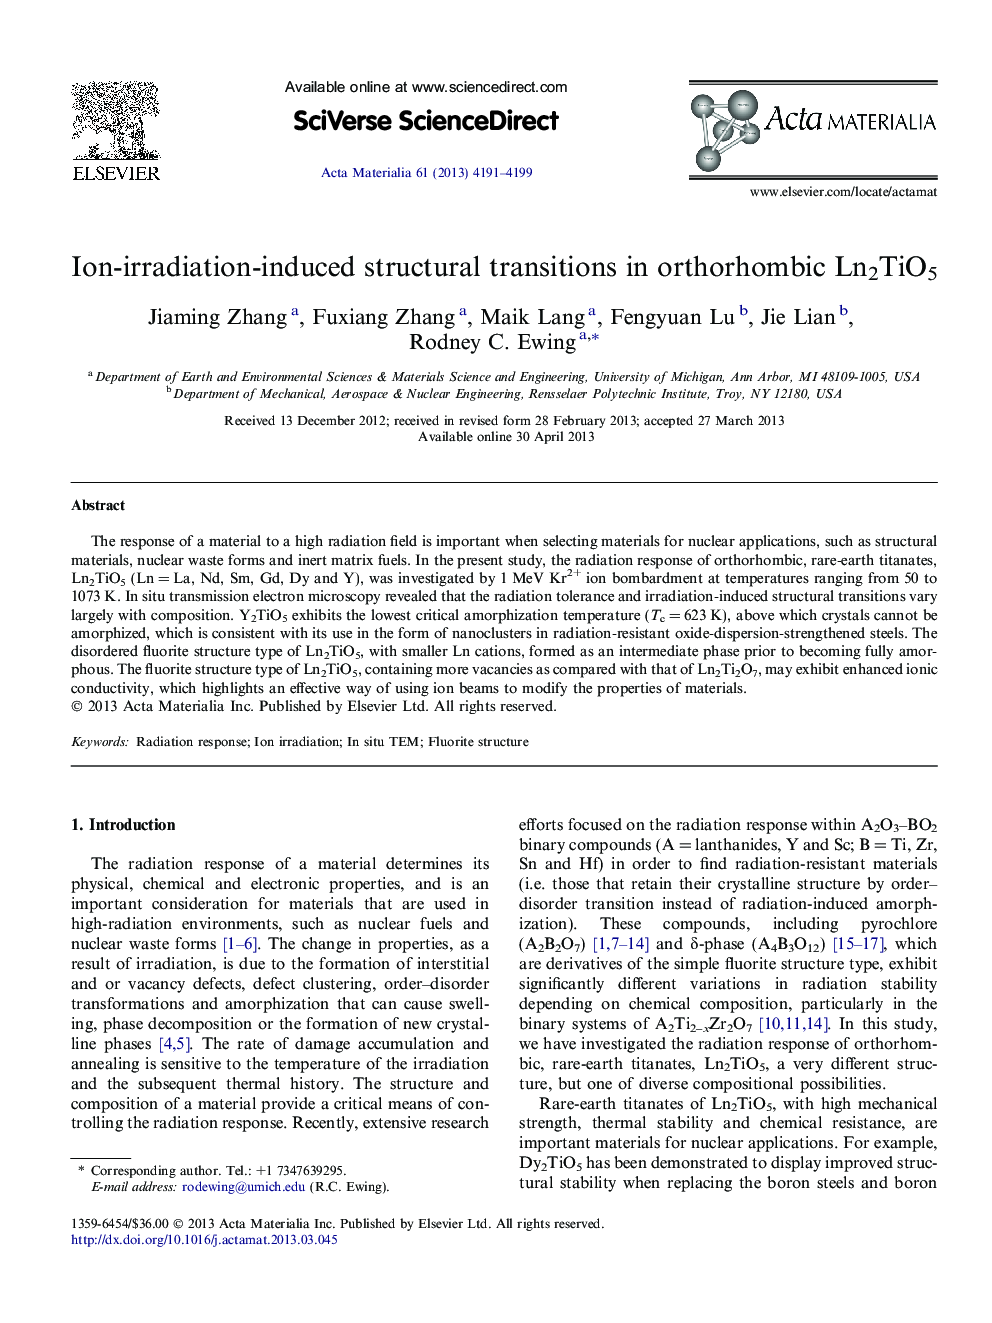 Ion-irradiation-induced structural transitions in orthorhombic Ln2TiO5